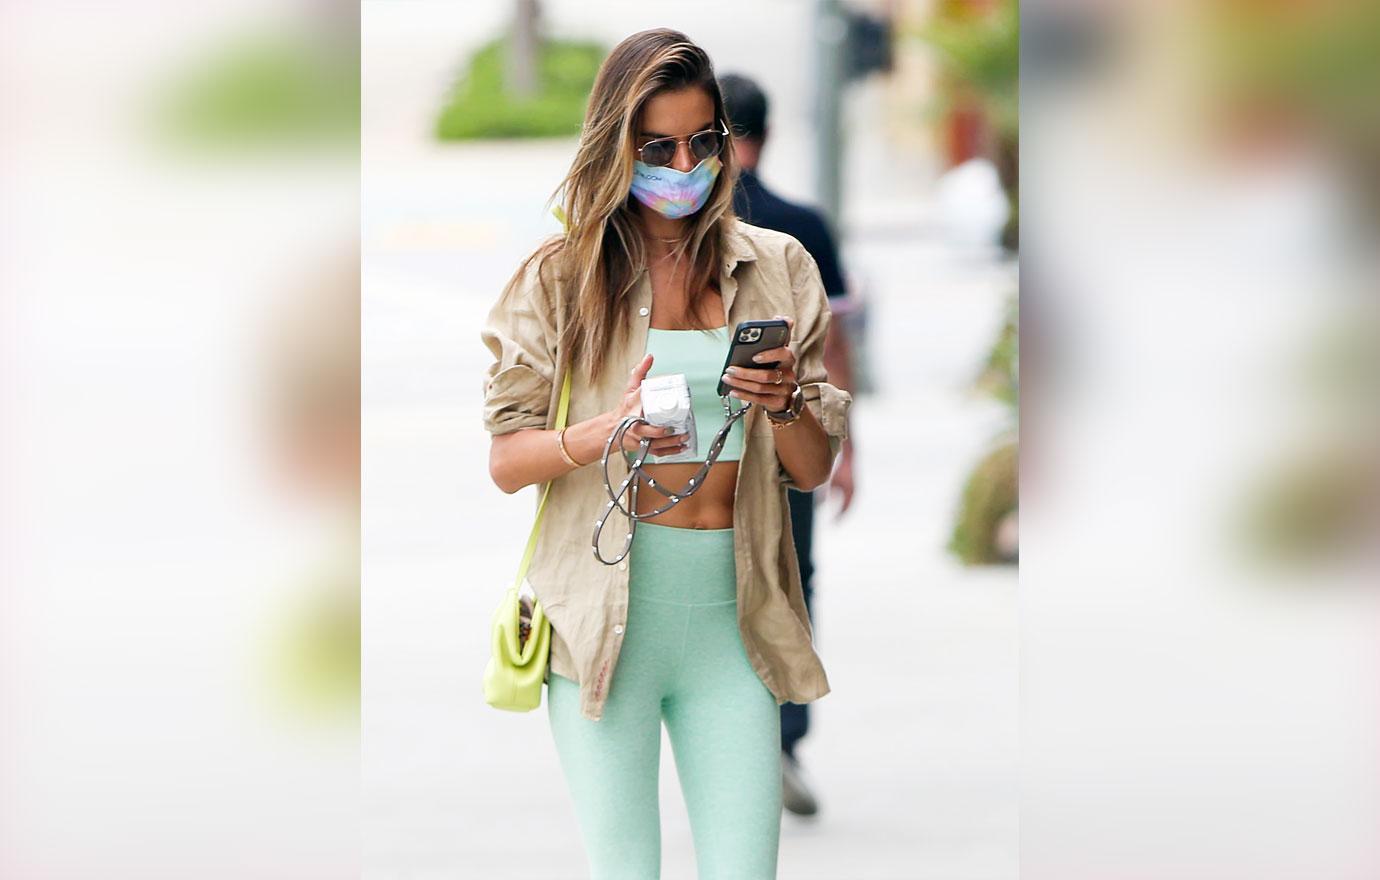 Alessandra Ambrosio Shows Off Rock-Hard Abs In Mint Alo Yoga Set